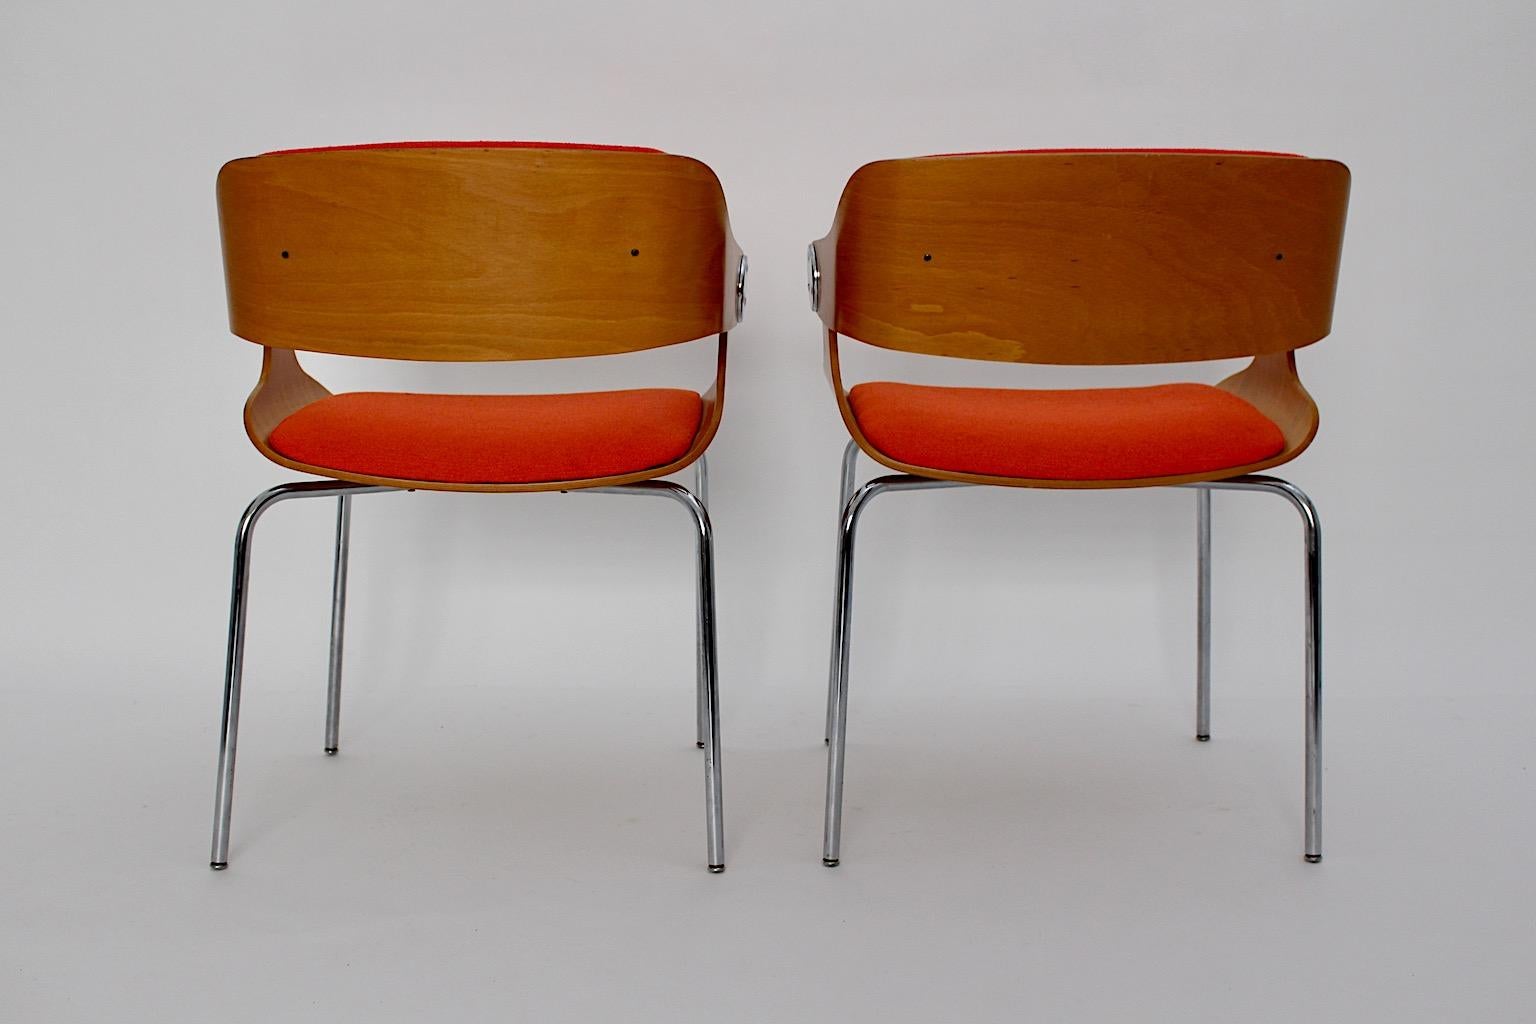 Fabric Mid Century Modern Vintage Orange Dining Chairs Pair Eugen Schmidt 1965 Germany For Sale